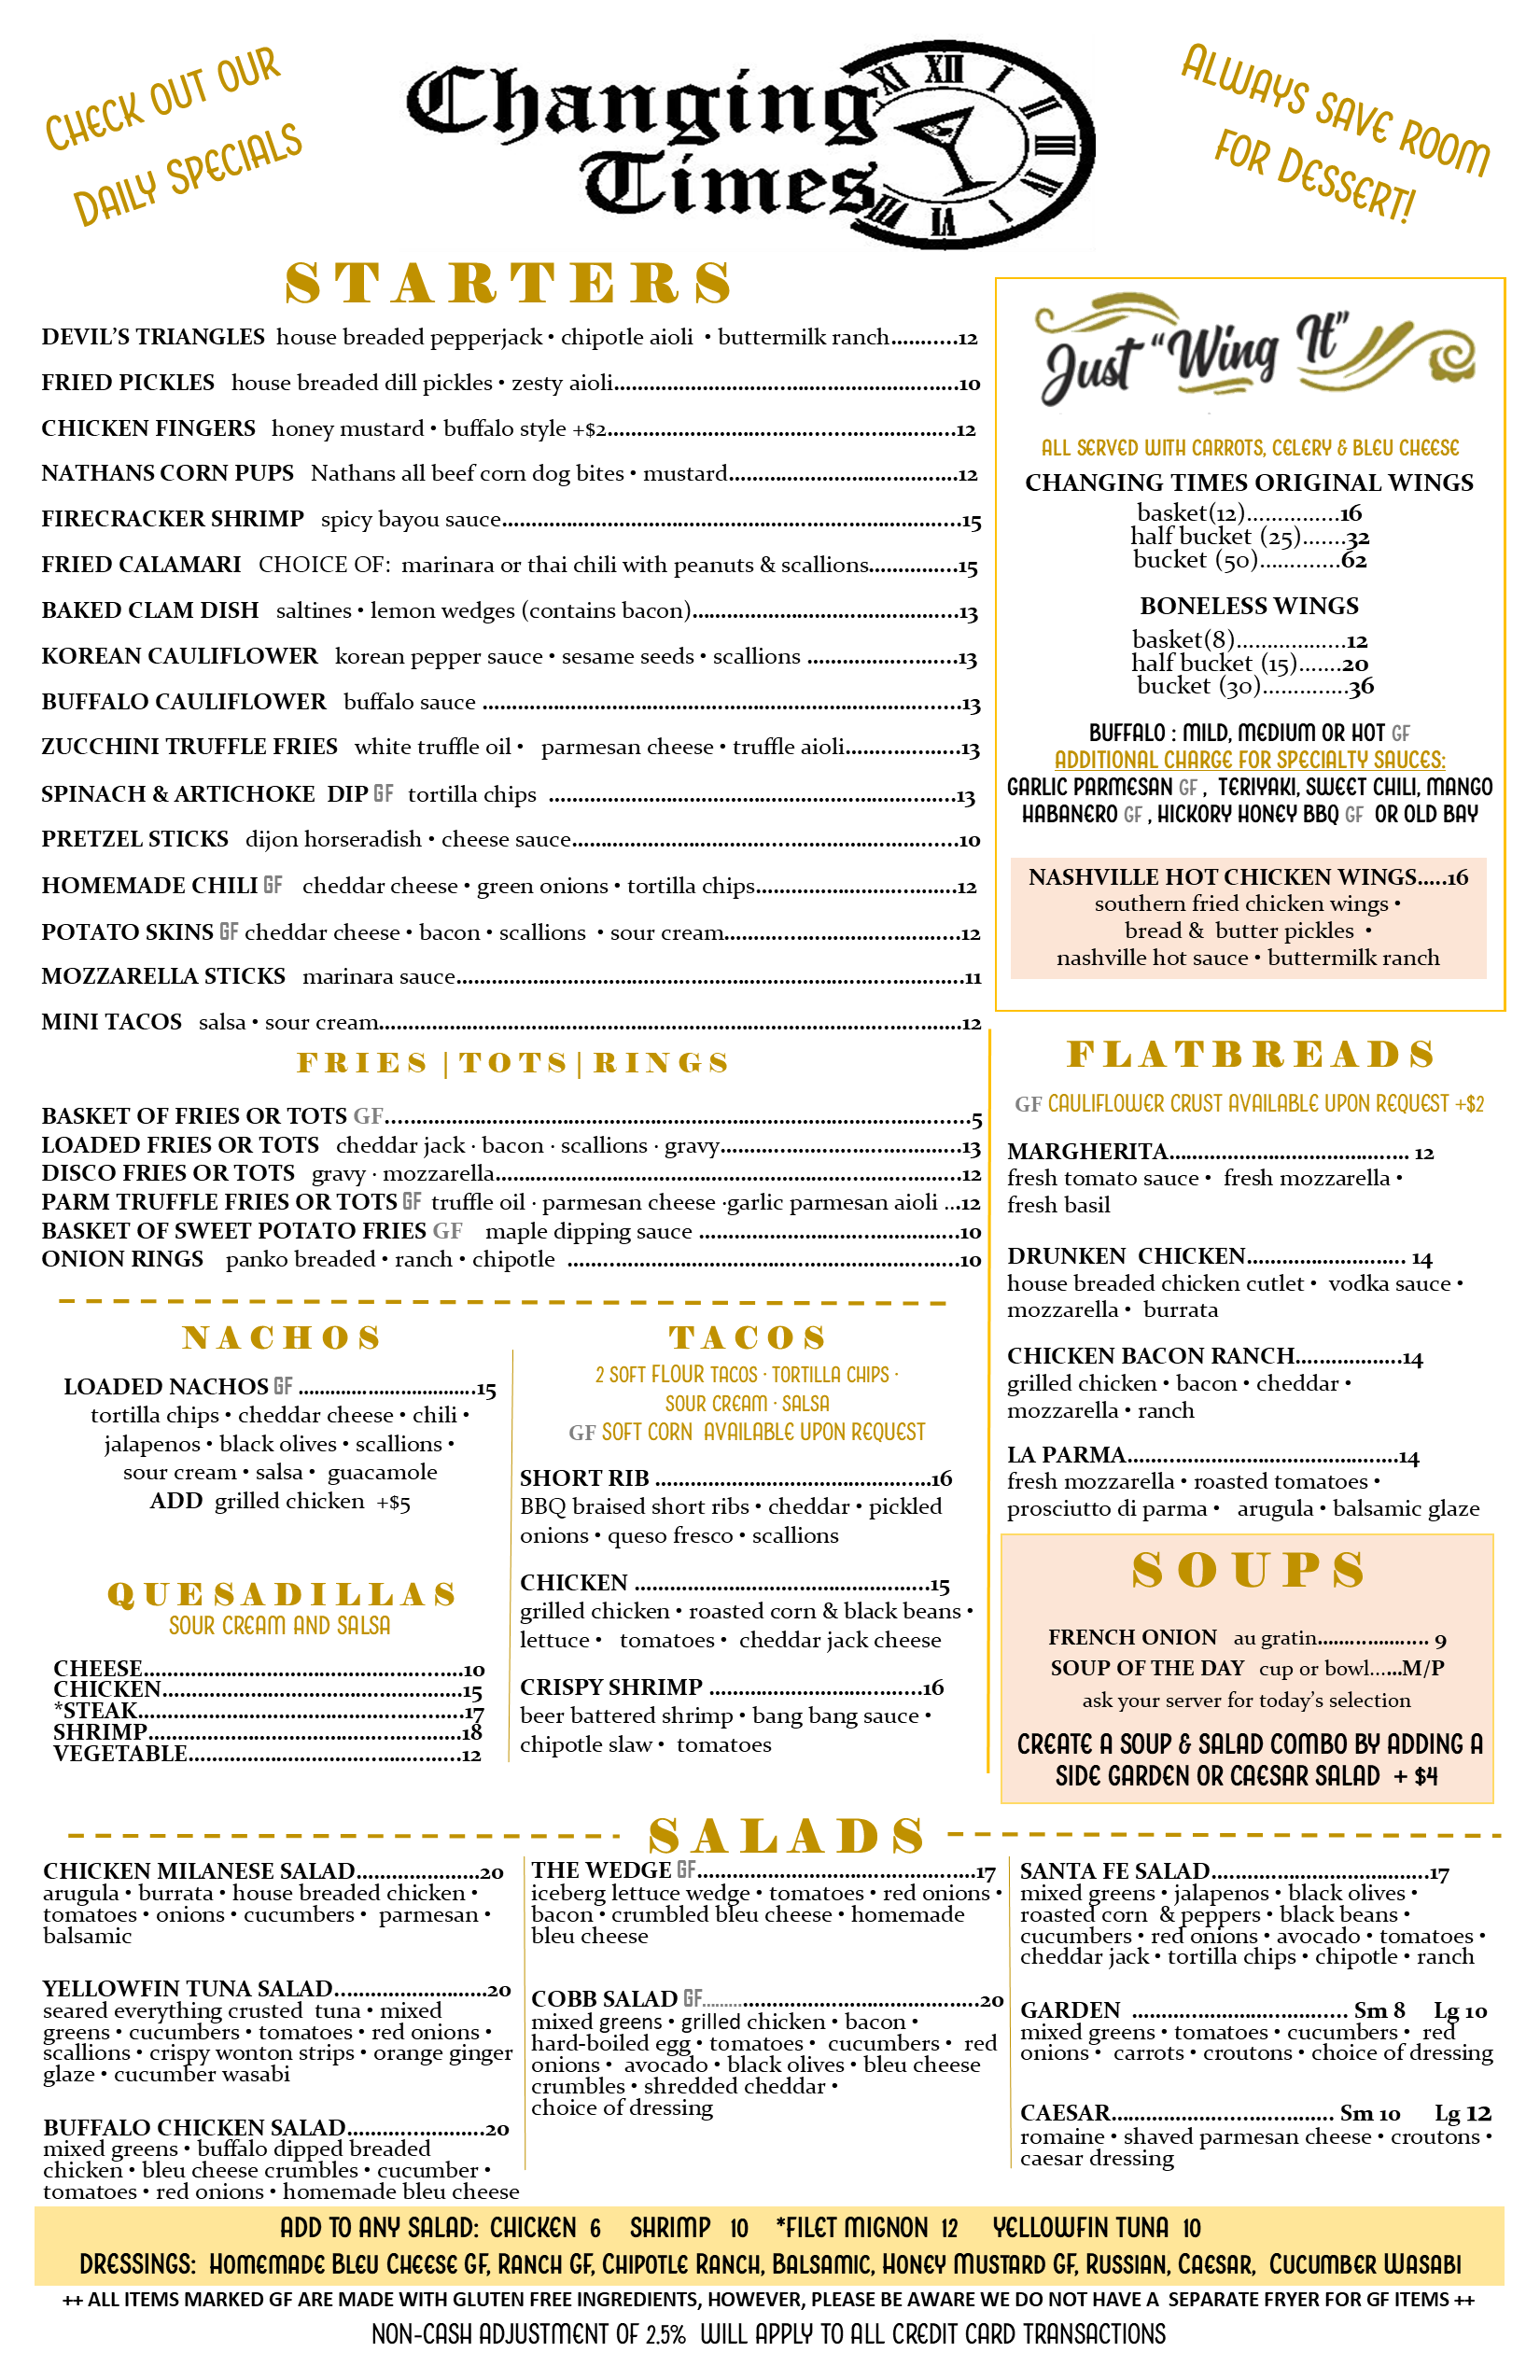 Changing Times East Northport Menu